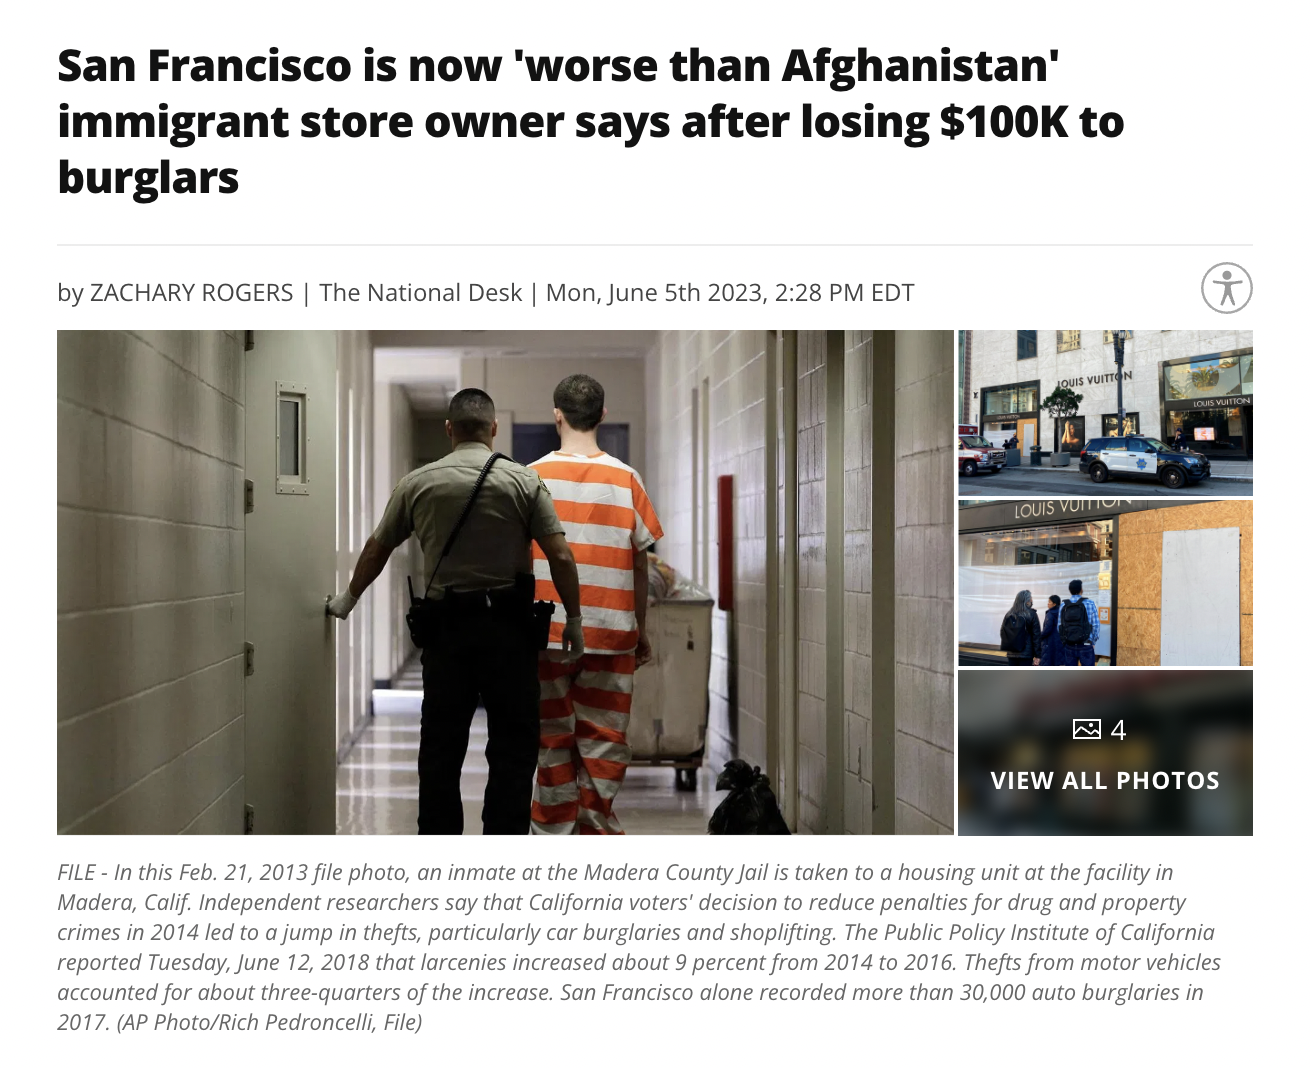 communication - San Francisco is now 'worse than Afghanistan' immigrant store owner says after losing $ to burglars by Zachary Rogers | The National Desk | Mon, June 5th 2023, Edt Louis Voition 4 View All Photos File In this Feb. 21, 2013 file photo, an i